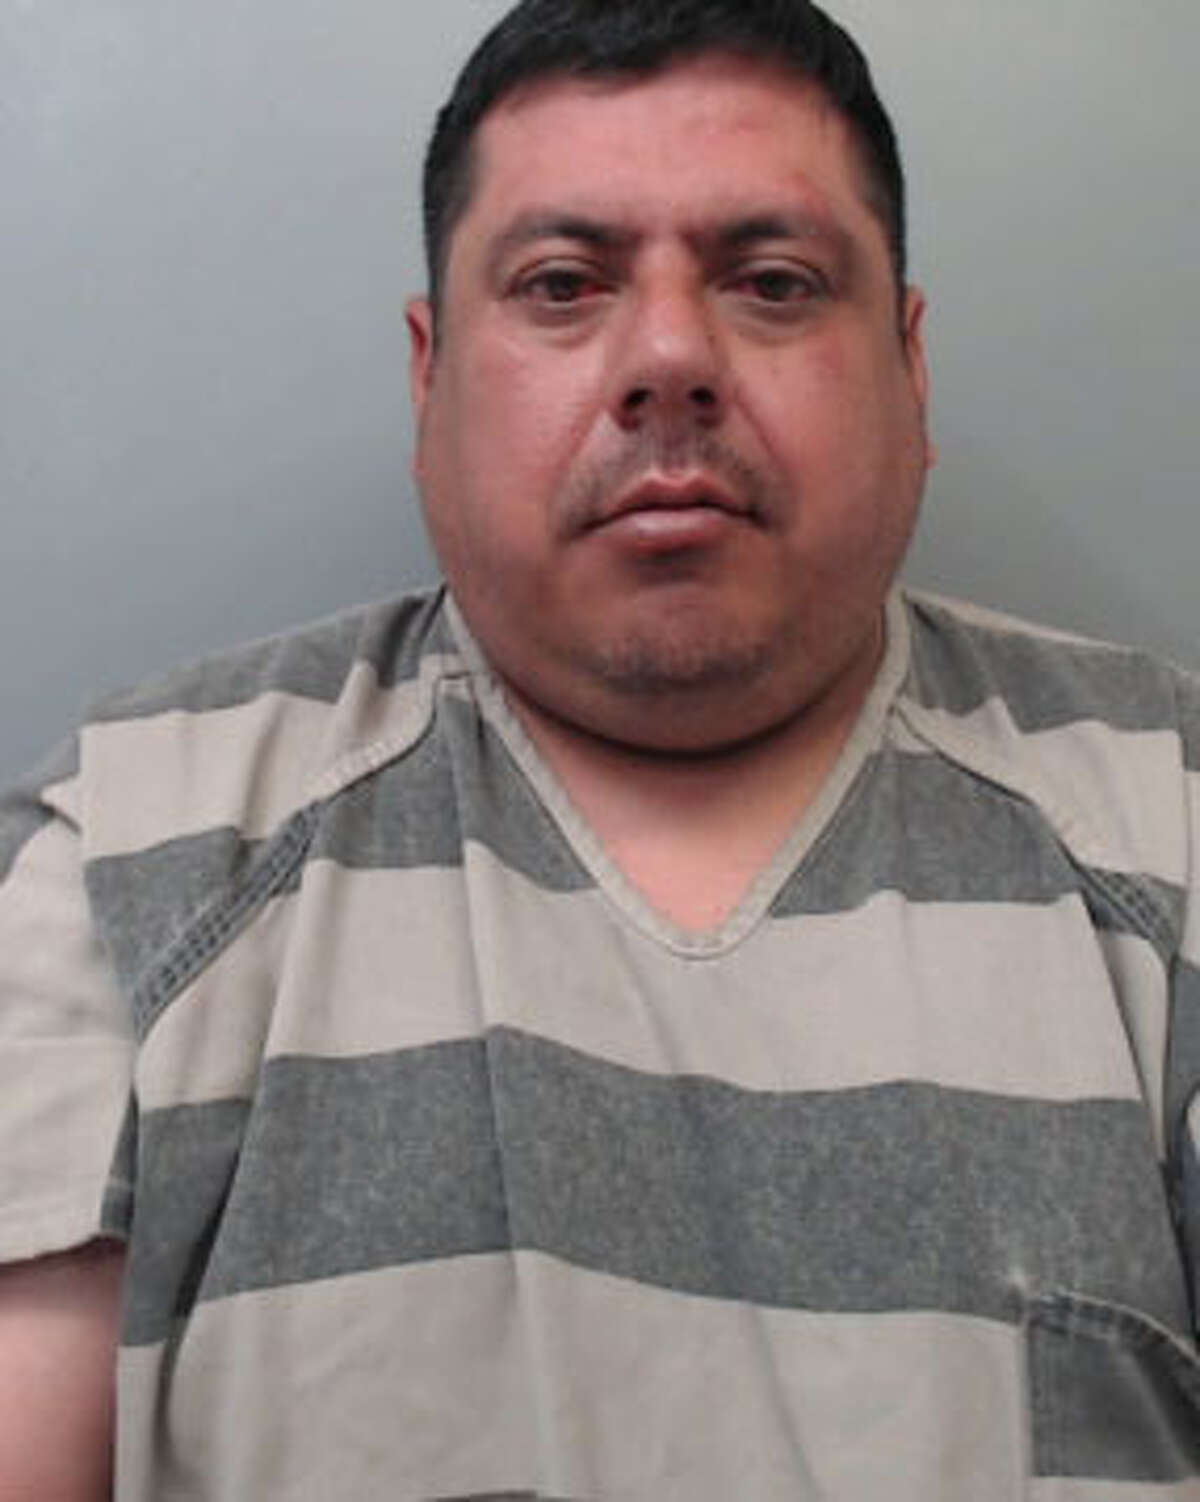 Carlos Ramiro Obeso-Medina, 41, was charged with reckless driving, fleeing from a police officer and resisting arrest.